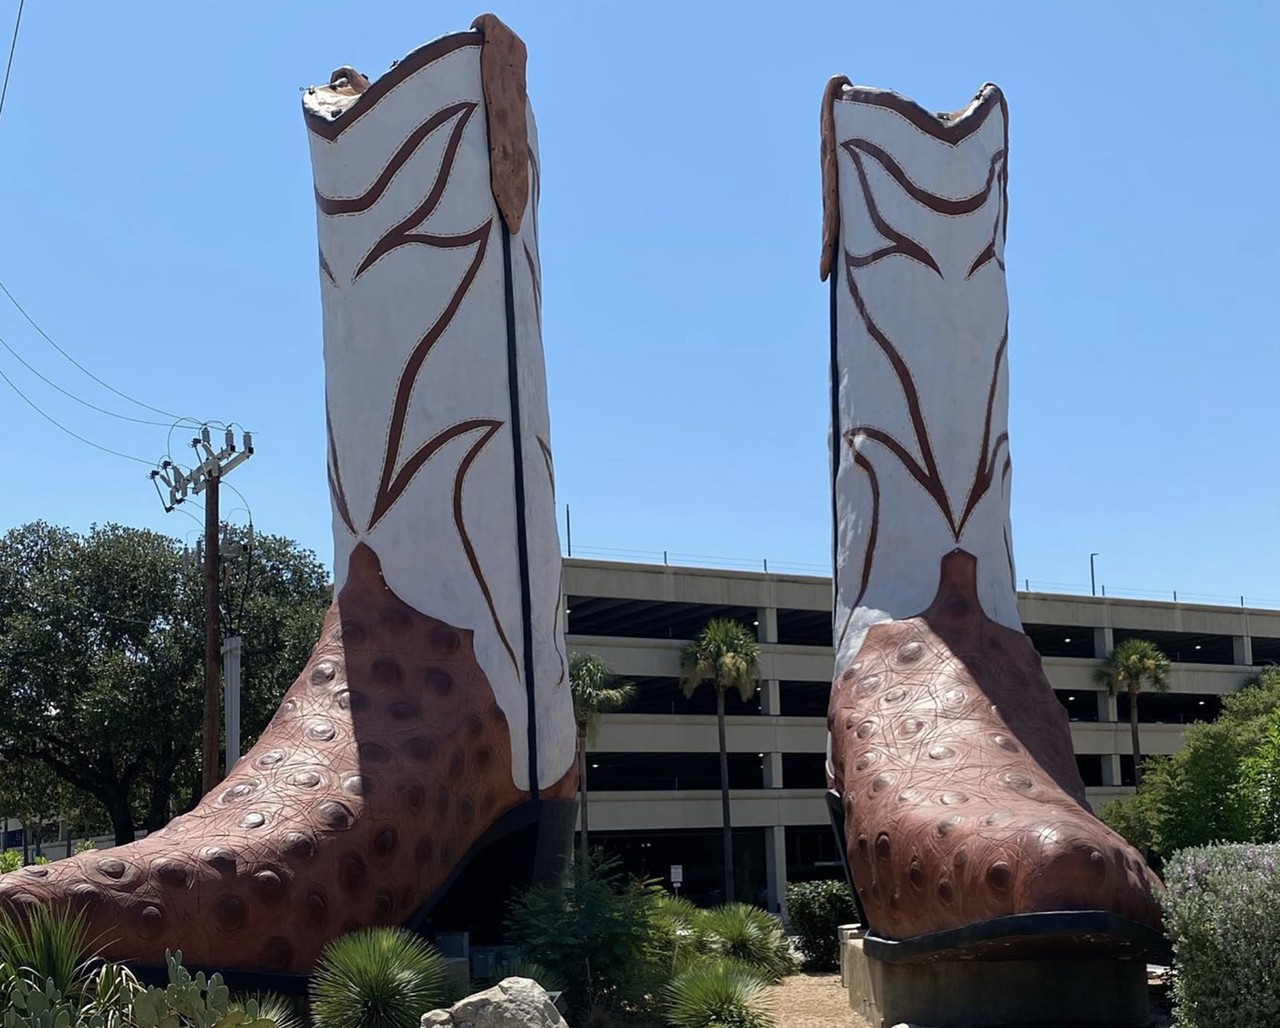 World’s Largest Cowboy Boots, San Antonio
North Star Mall, 7400 San Pedro Ave., San Antonio, roadsideamerica.com
Native San Antonians might not pay any attention to the giant cowboy boots in front of North Star Mall, but there's more to them than you'd think. Made by the larger-than-life artist Bob "Daddy-O" Wade, these boots were installed at North Star in 1979 and officially made it into the Guinness Book of World Records as the World's Largest Cowboy Boots four decades later.
Photo via Instagram / 2ten.exploration